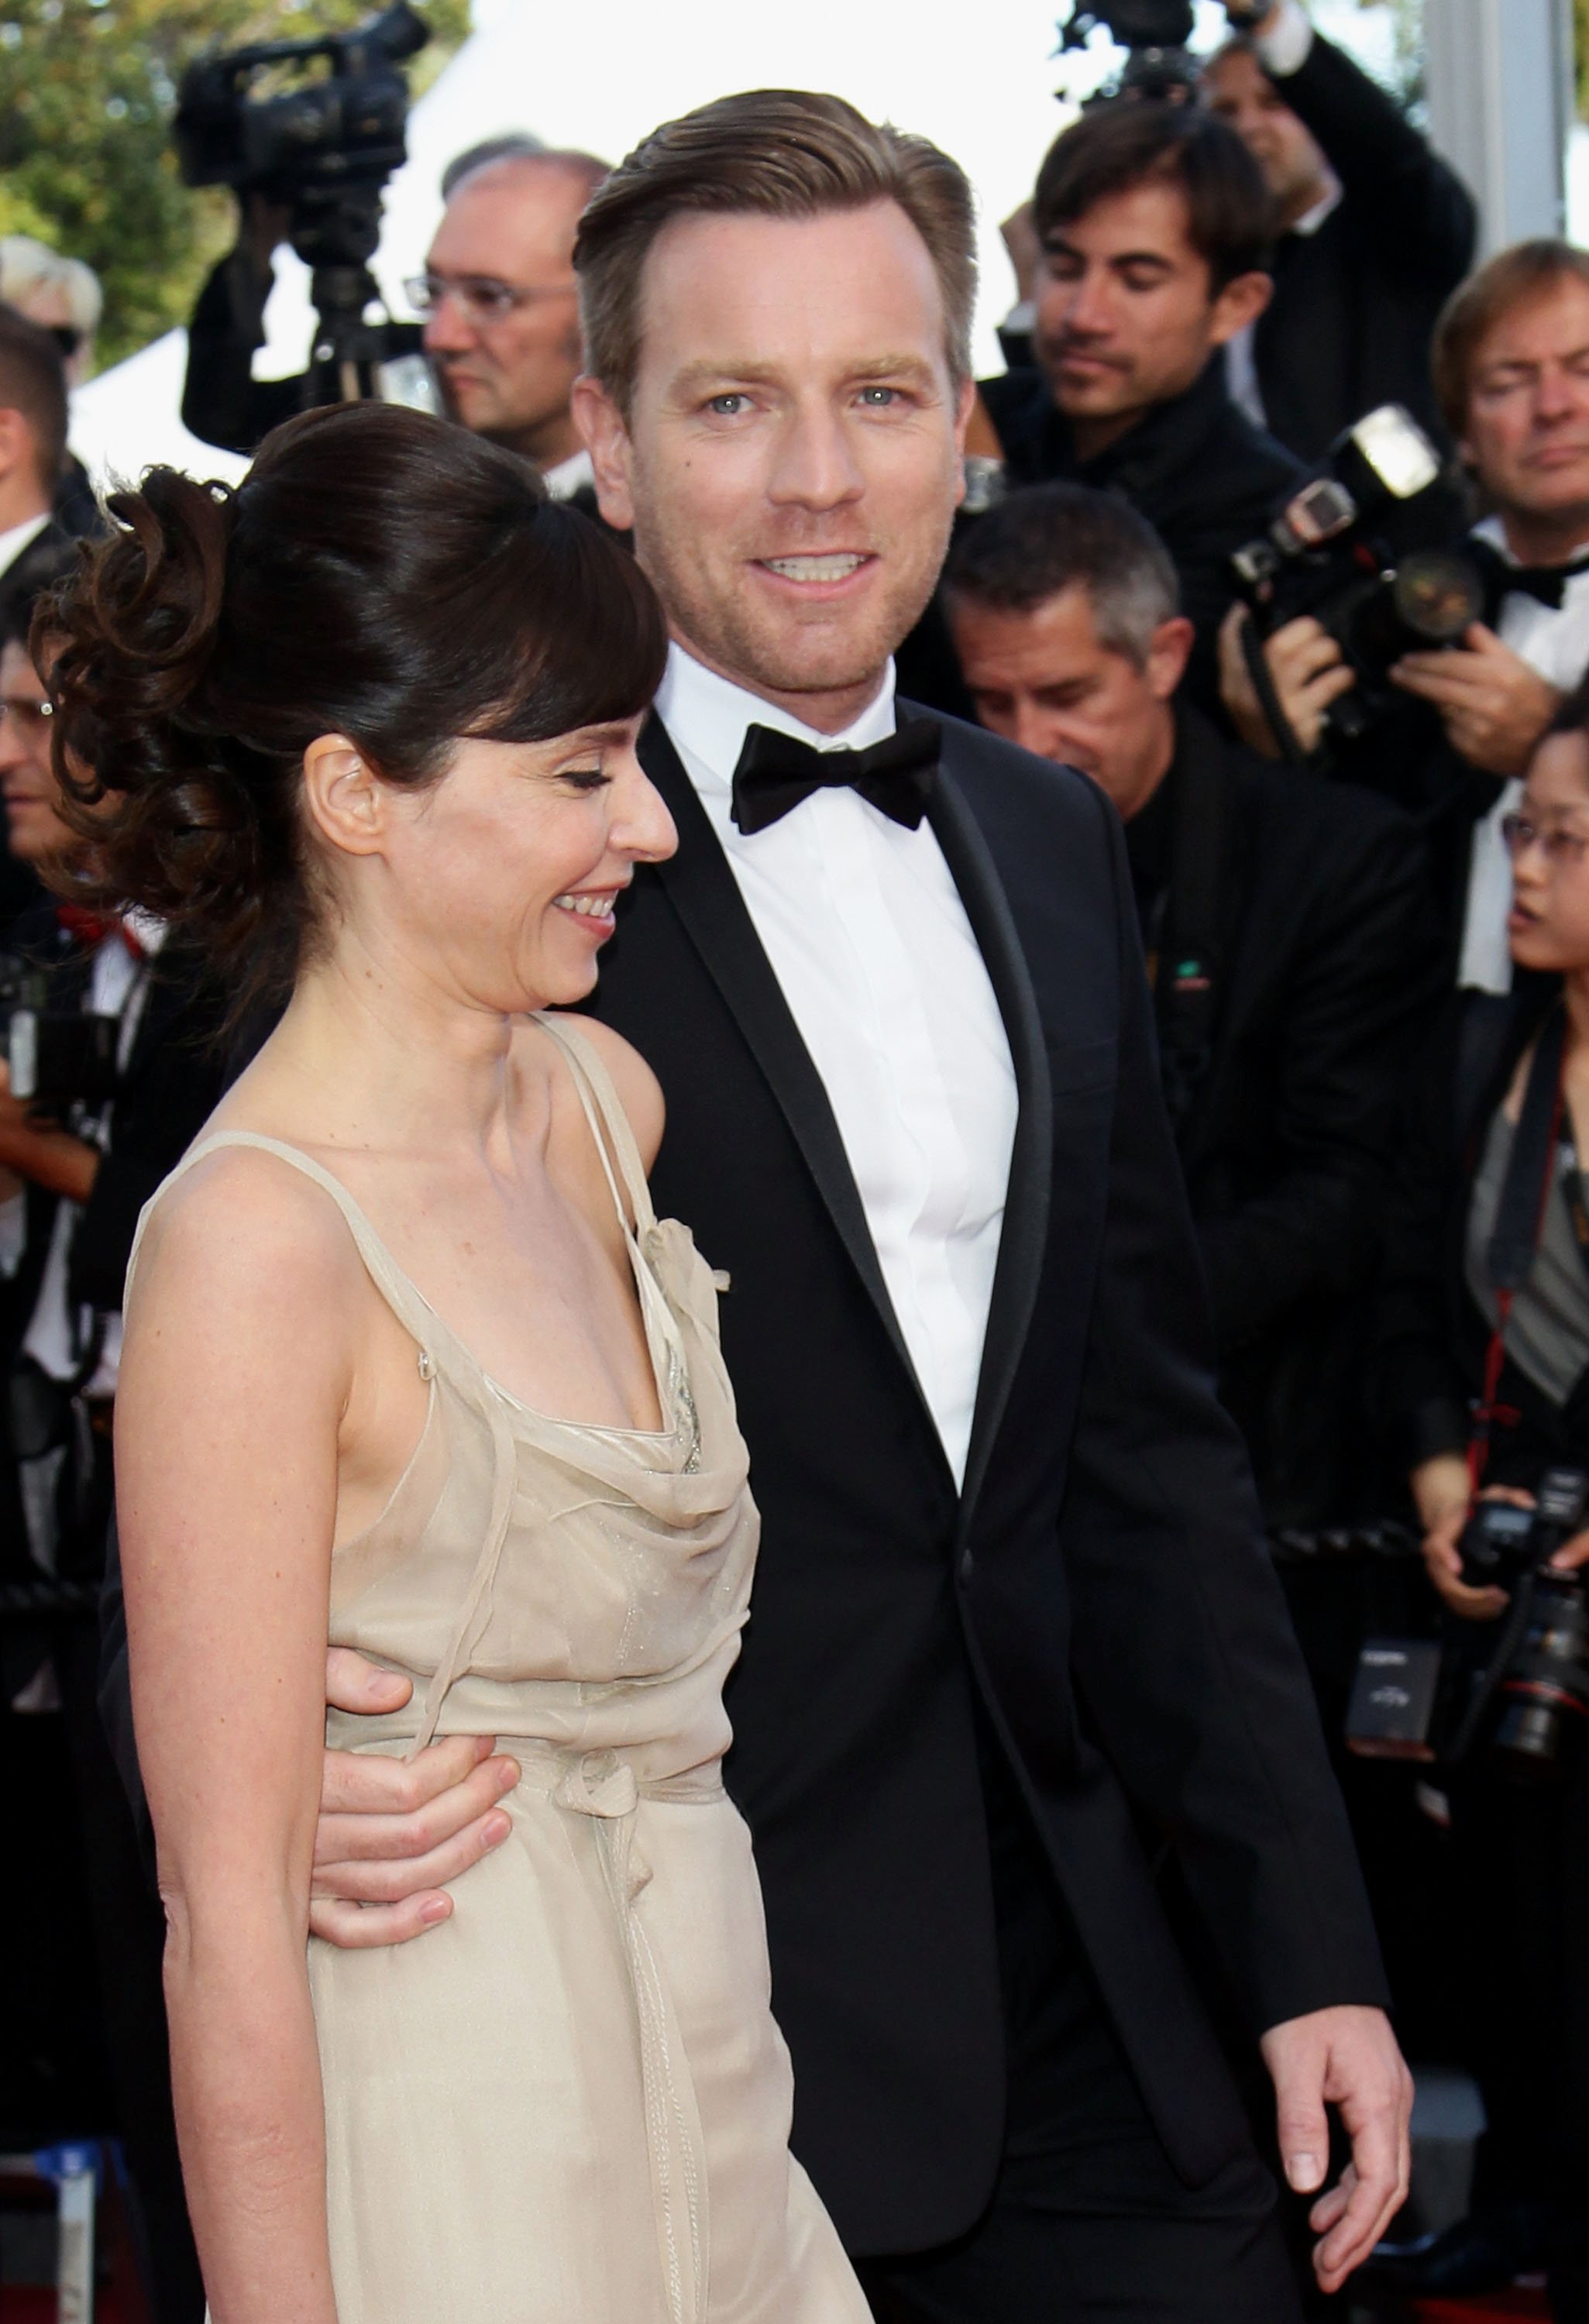 2012-05-23-Cannes-Film-Festival-On-The-Road-Premiere-019.jpg